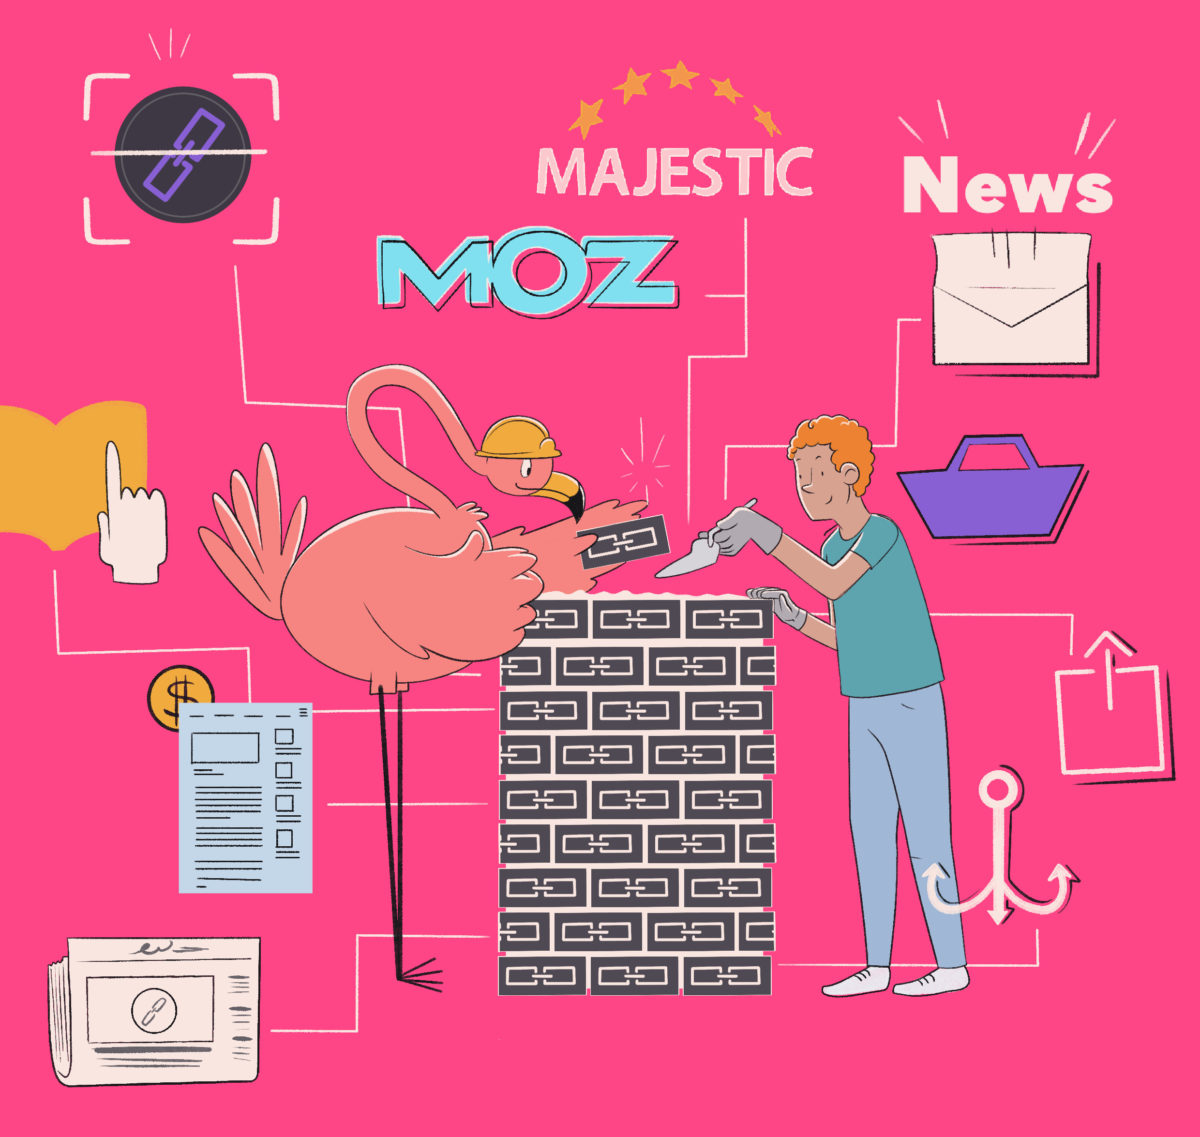 A colorful illustration featuring a person interacting with a flamingo in front of a brick wall, surrounded by various digital and seo-related icons, with the words "majestic," "moz," and "news" prominently displayed.